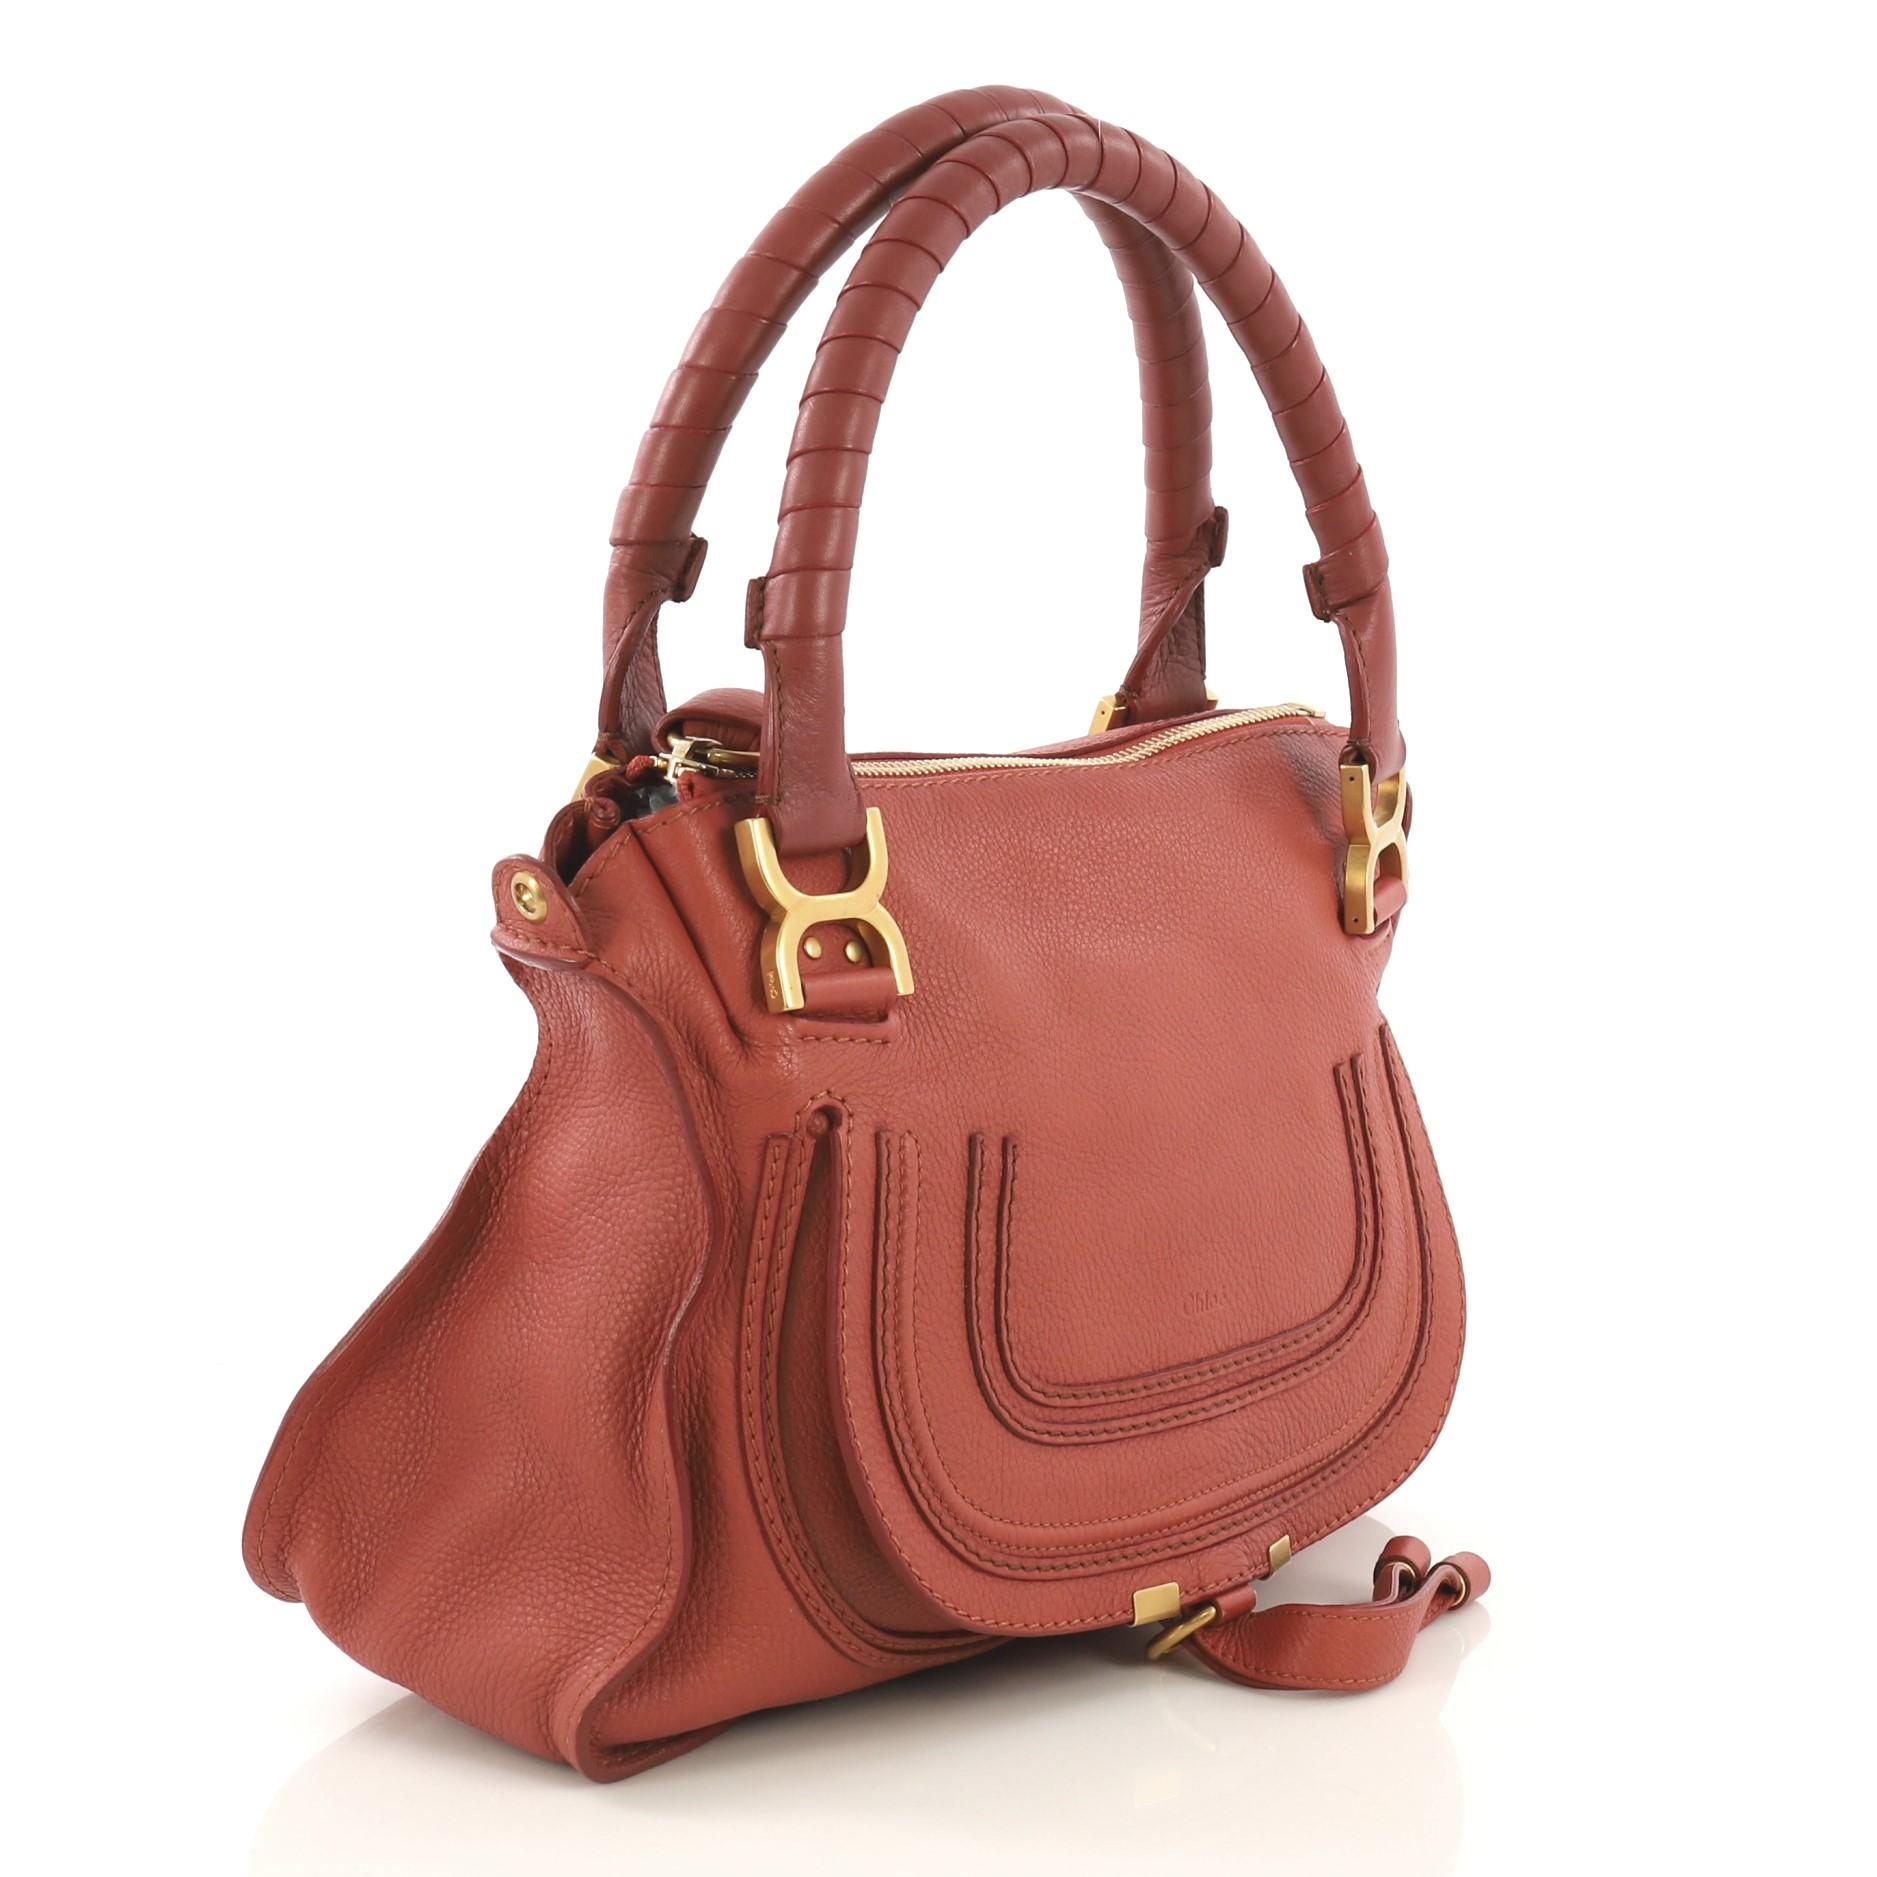 This Chloe Marcie Satchel Leather Medium, crafted in coral leather, features wrapped leather handles, horseshoe stitched on front flap, and gold-tone hardware. Its top zip closure opens to a green fabric interior with zip and slip pockets.